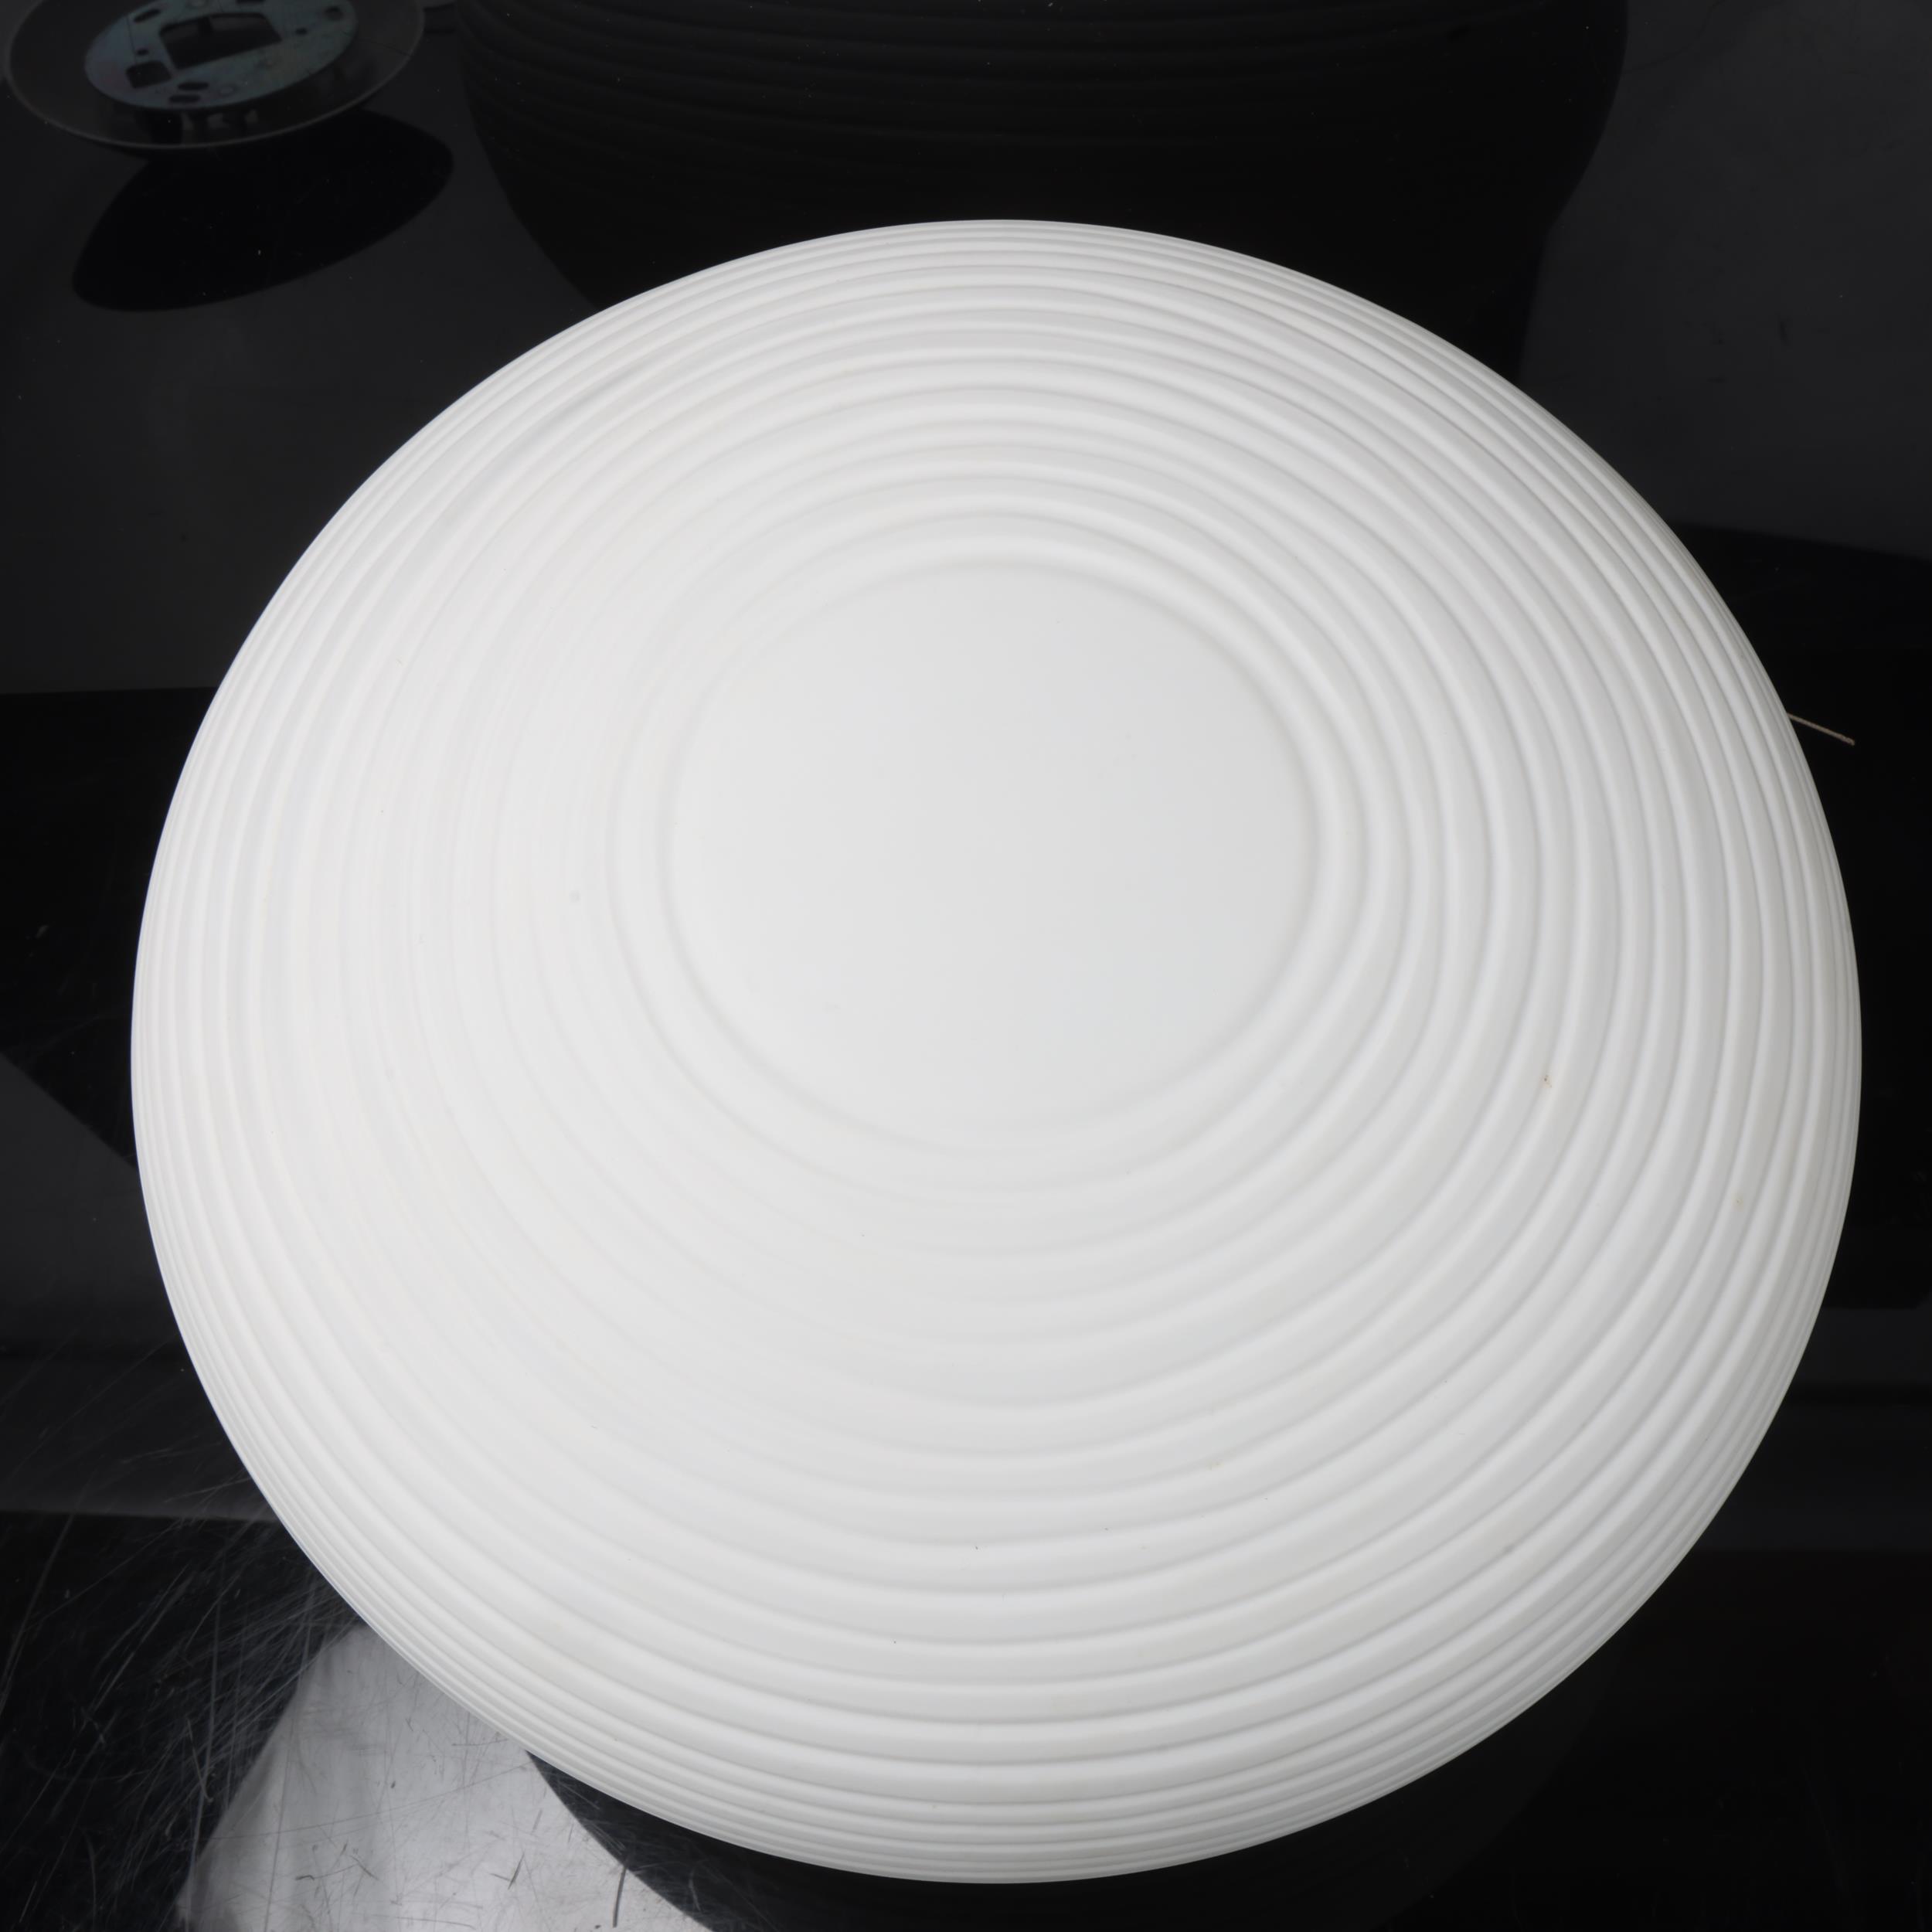 A Foscarini "Rituals" white glass pendant lamp, with white metal ceiling rose, diameter approx 35cm, - Image 3 of 3